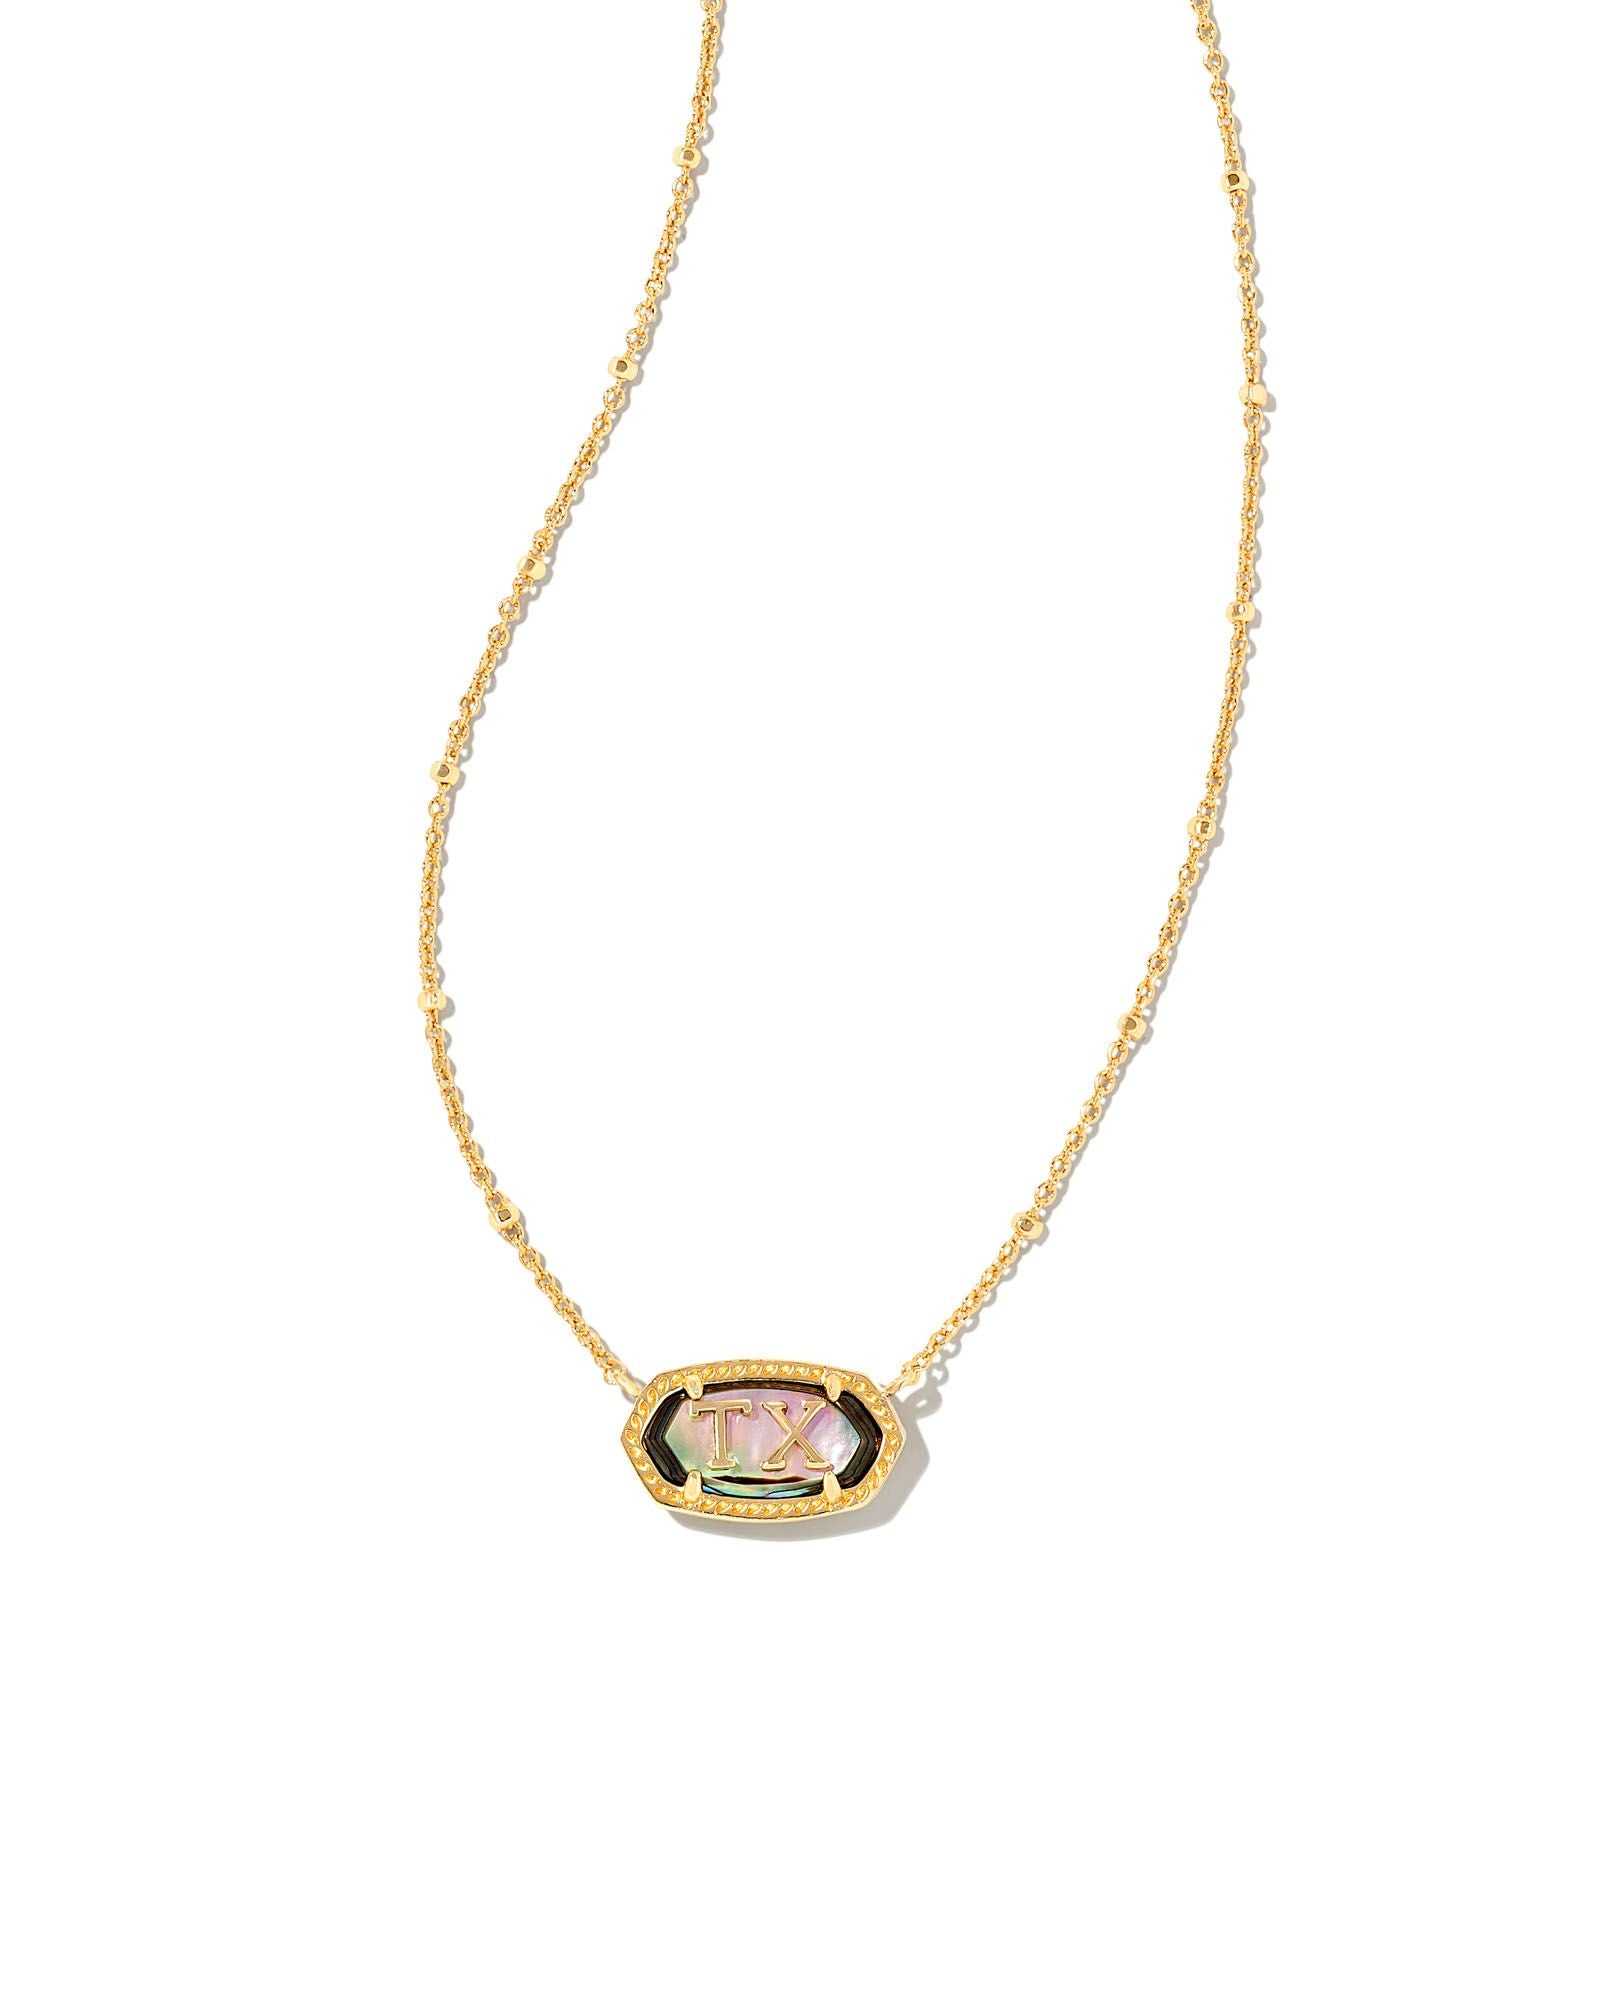 Elisa Texas Necklace in Gold Abalone Shell